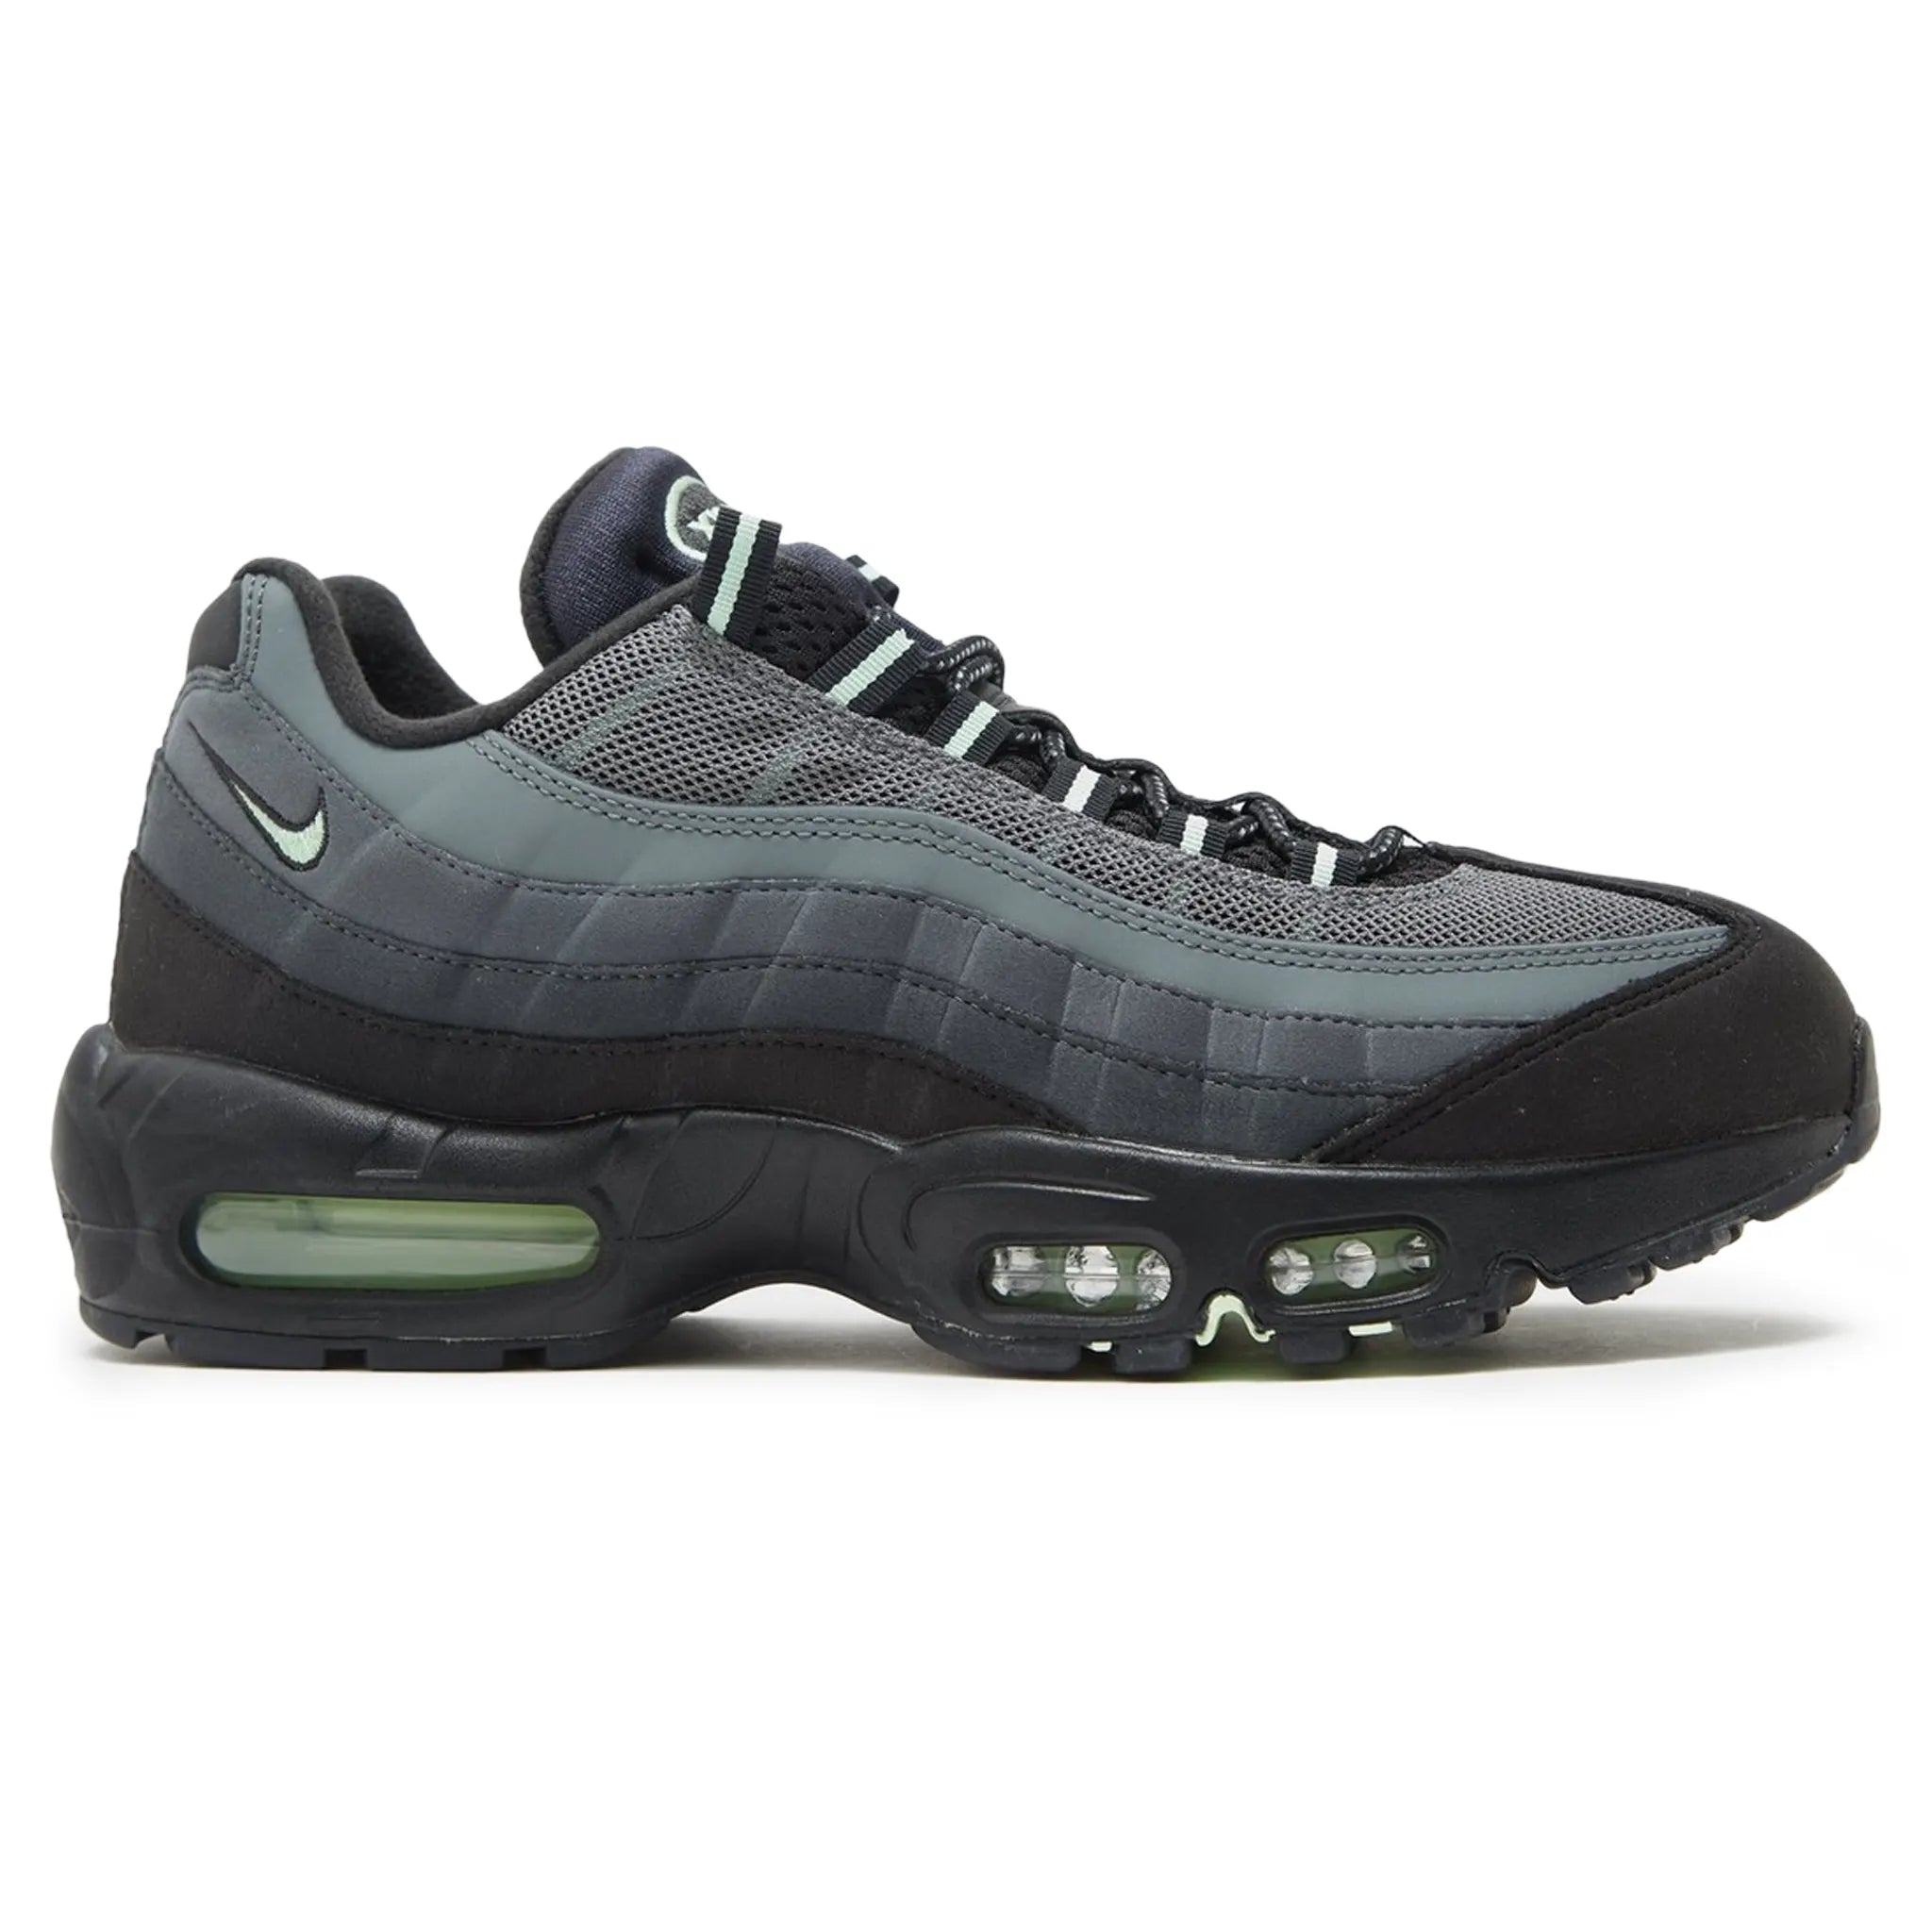 Side view of Nike Air Max 95 Vapor Green HM0622-001